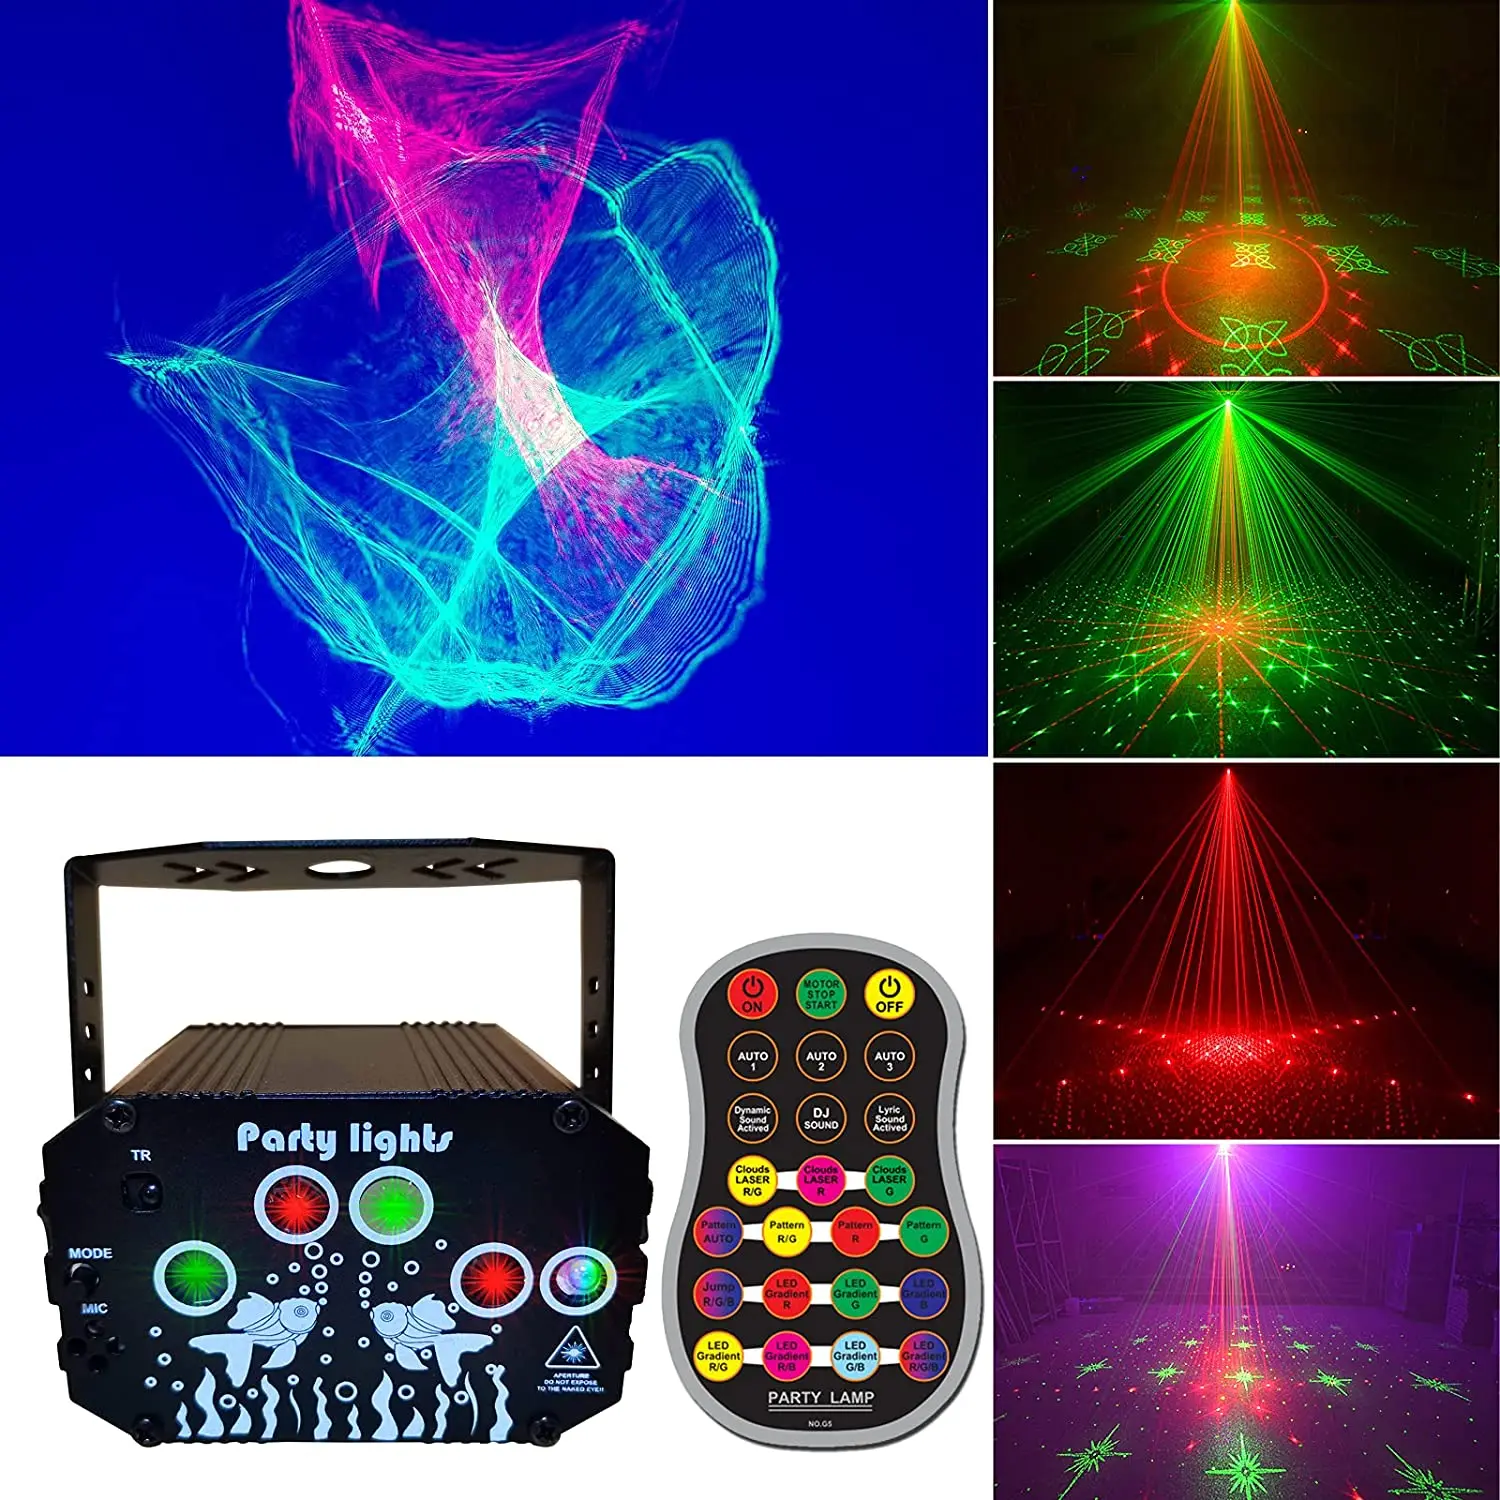 Atotalof Dj Laser Party Light Northern Lights USB Strobe Laser Lights 60in1 Pattern for Club Christmas Birthday Stage Projector